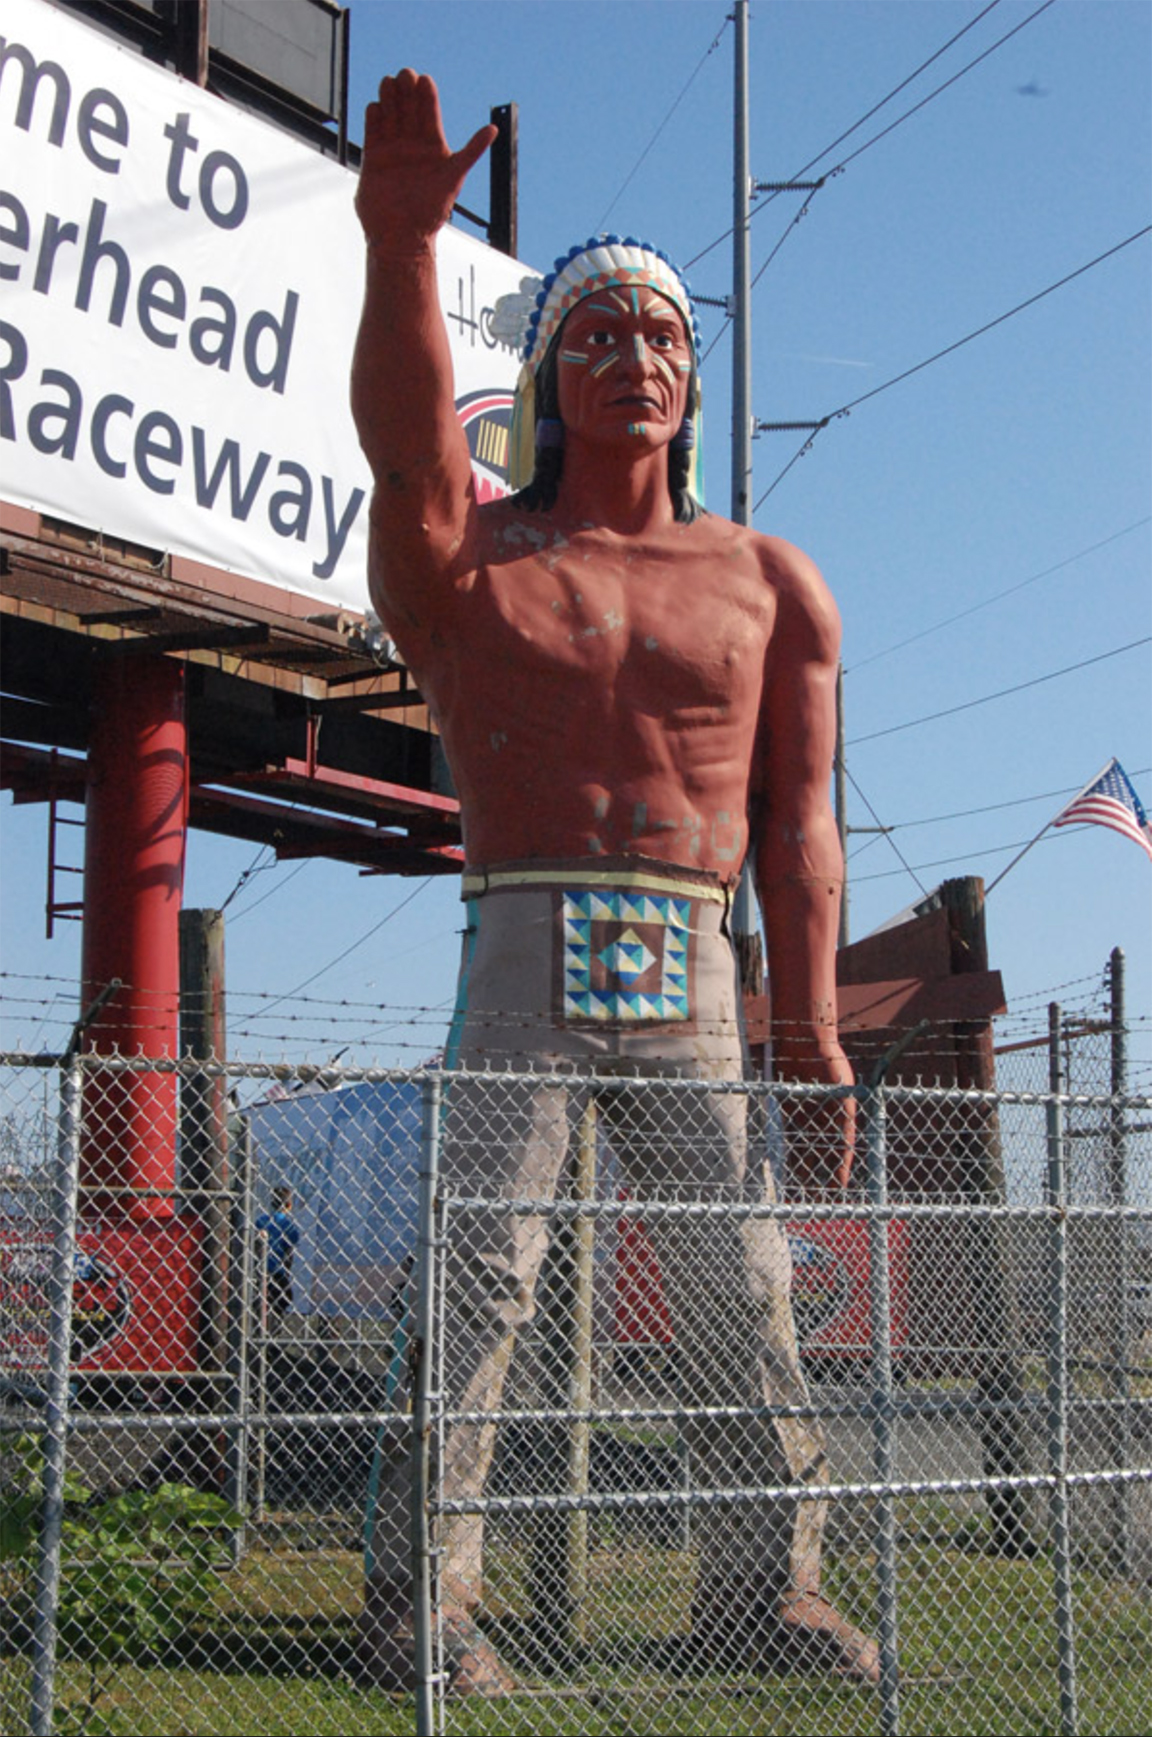 "Big Chief," the Riverhead Raceway Indian is often named among local roadside attractions